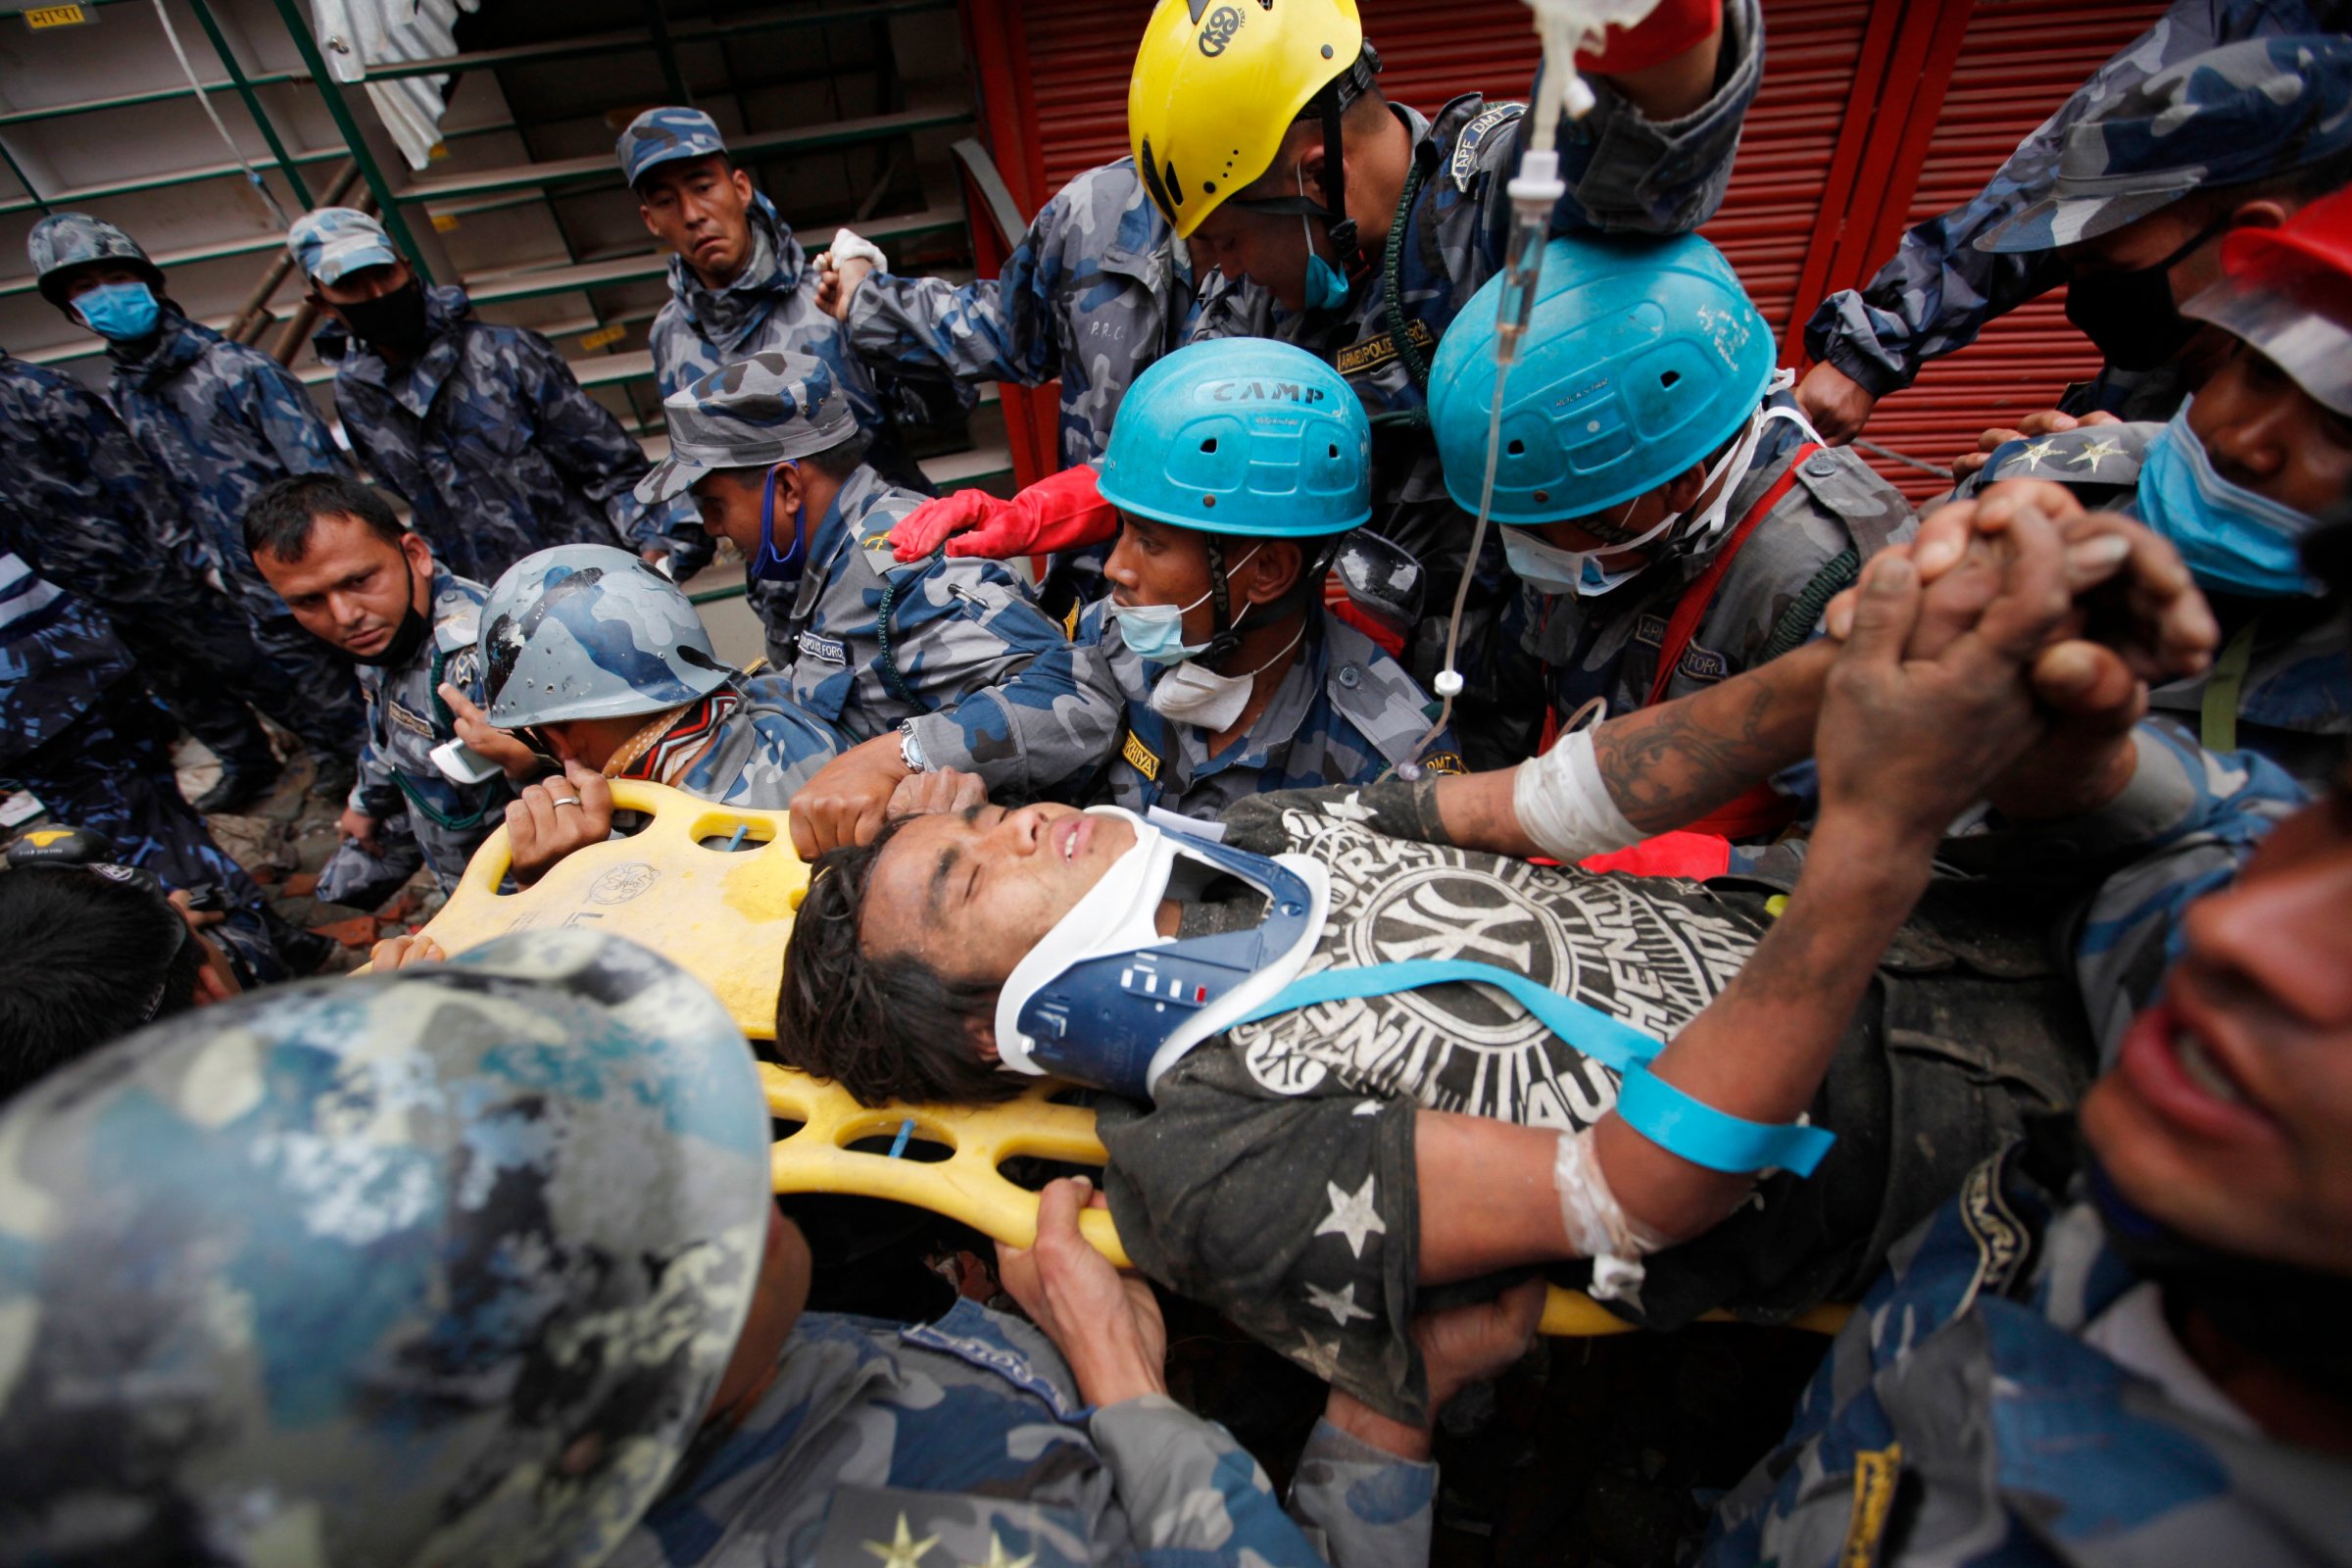 Pemba Tamang is carried on a stretcher after being rescued by Nepalese policemen and U.S. rescue workers from a building that collapsed five days ago in Kathmandu, Nepal on April 30, 2015.